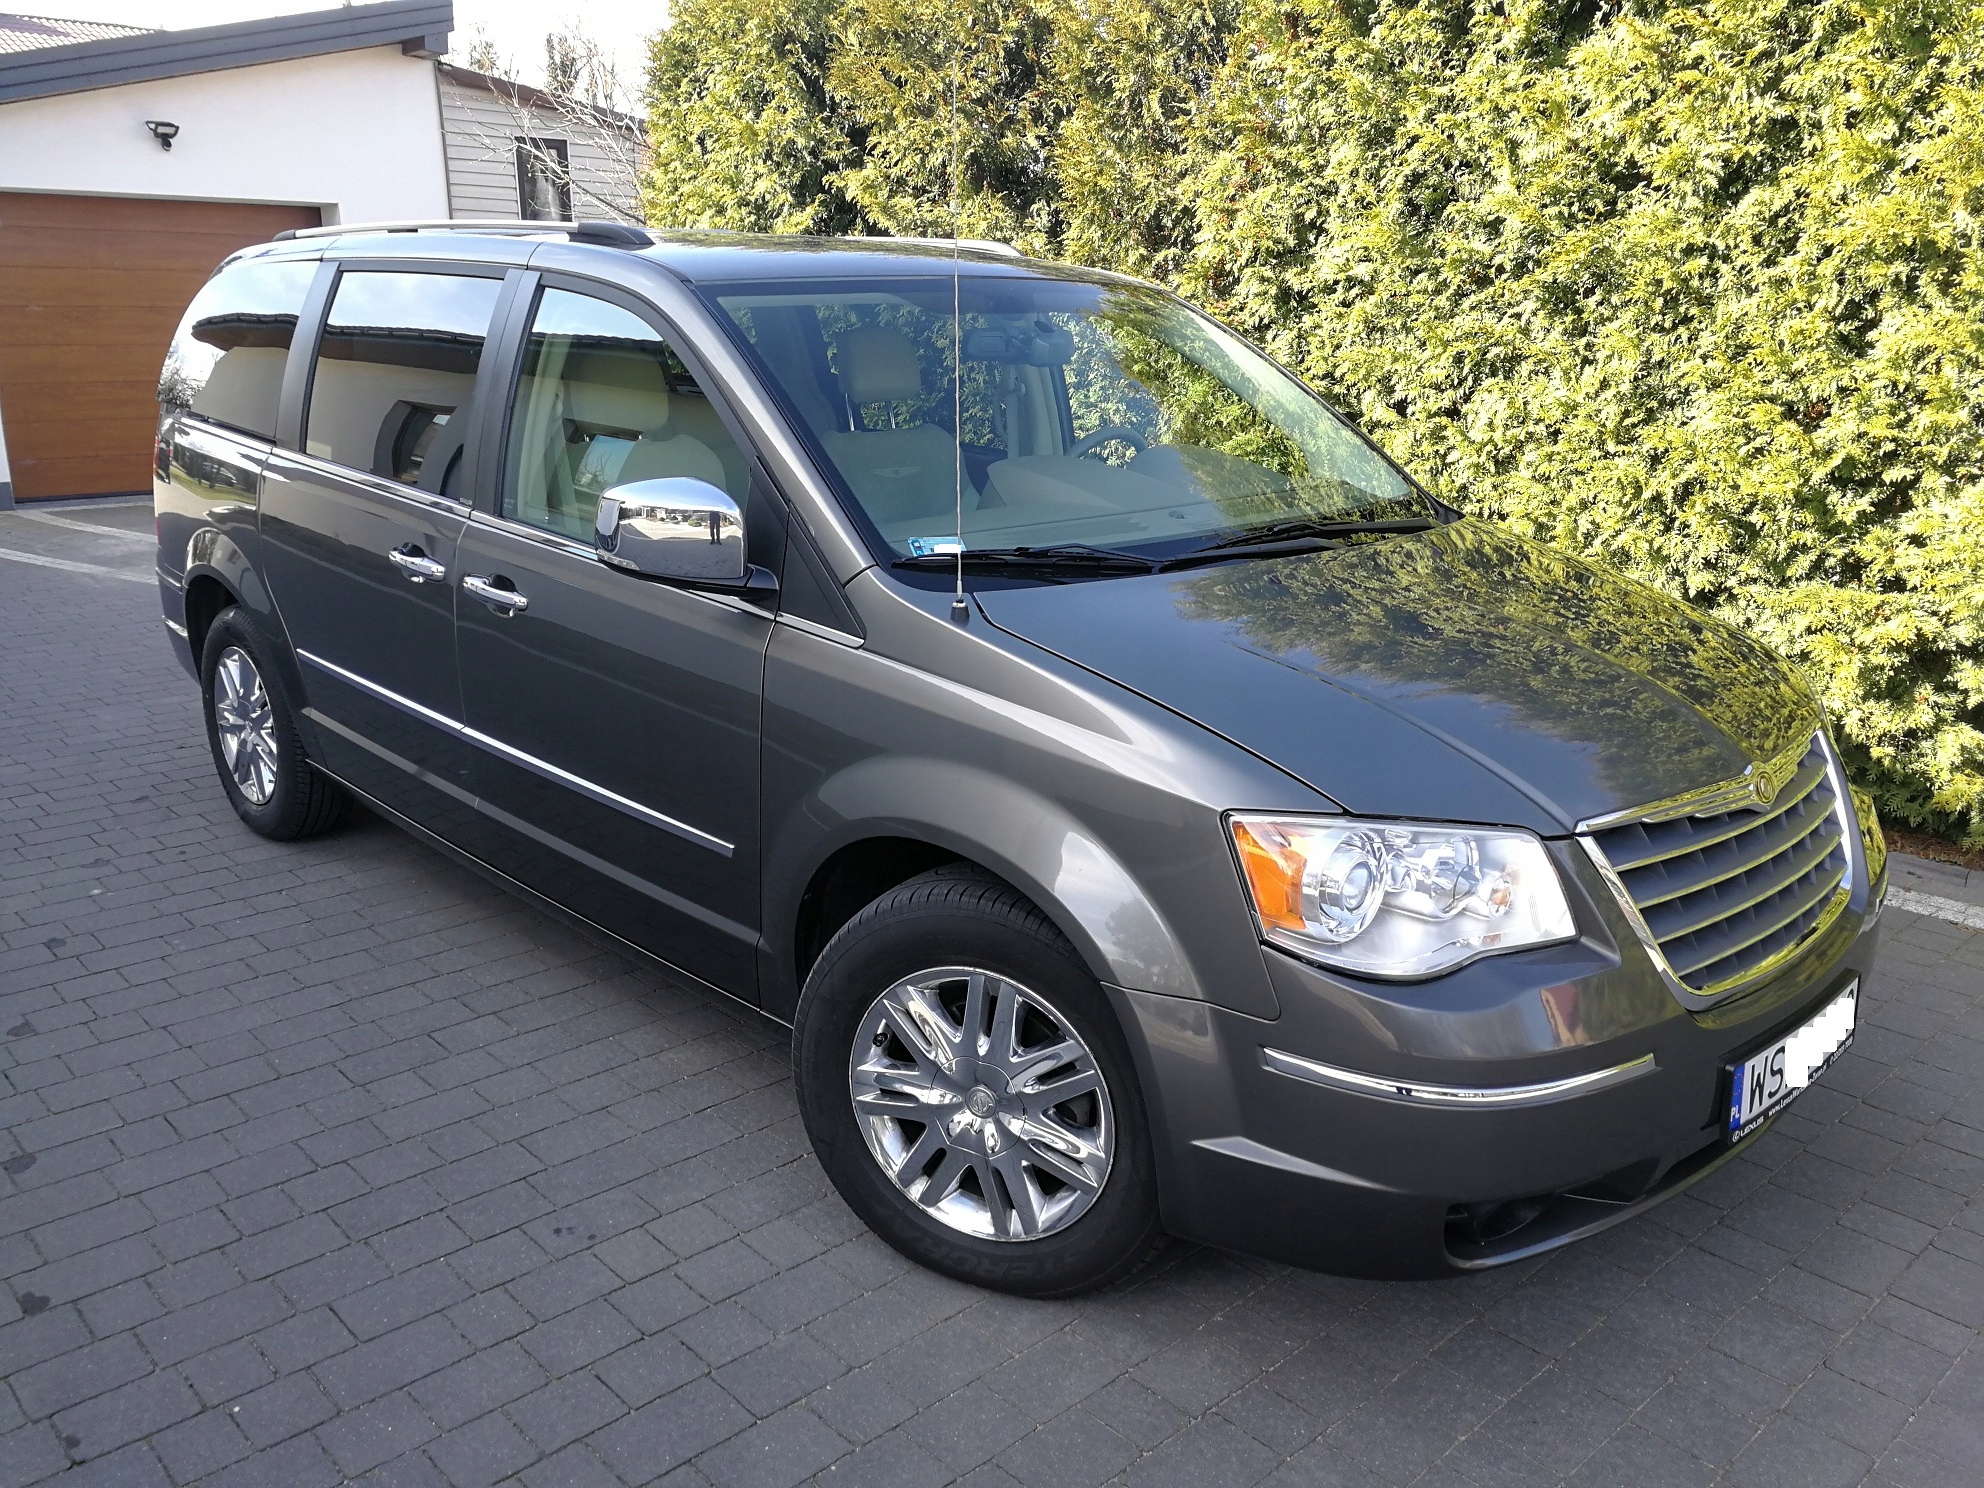 CHRYSLER TOWN & COUNTRY 4.0 V6 LIMITED 2010 7927564100